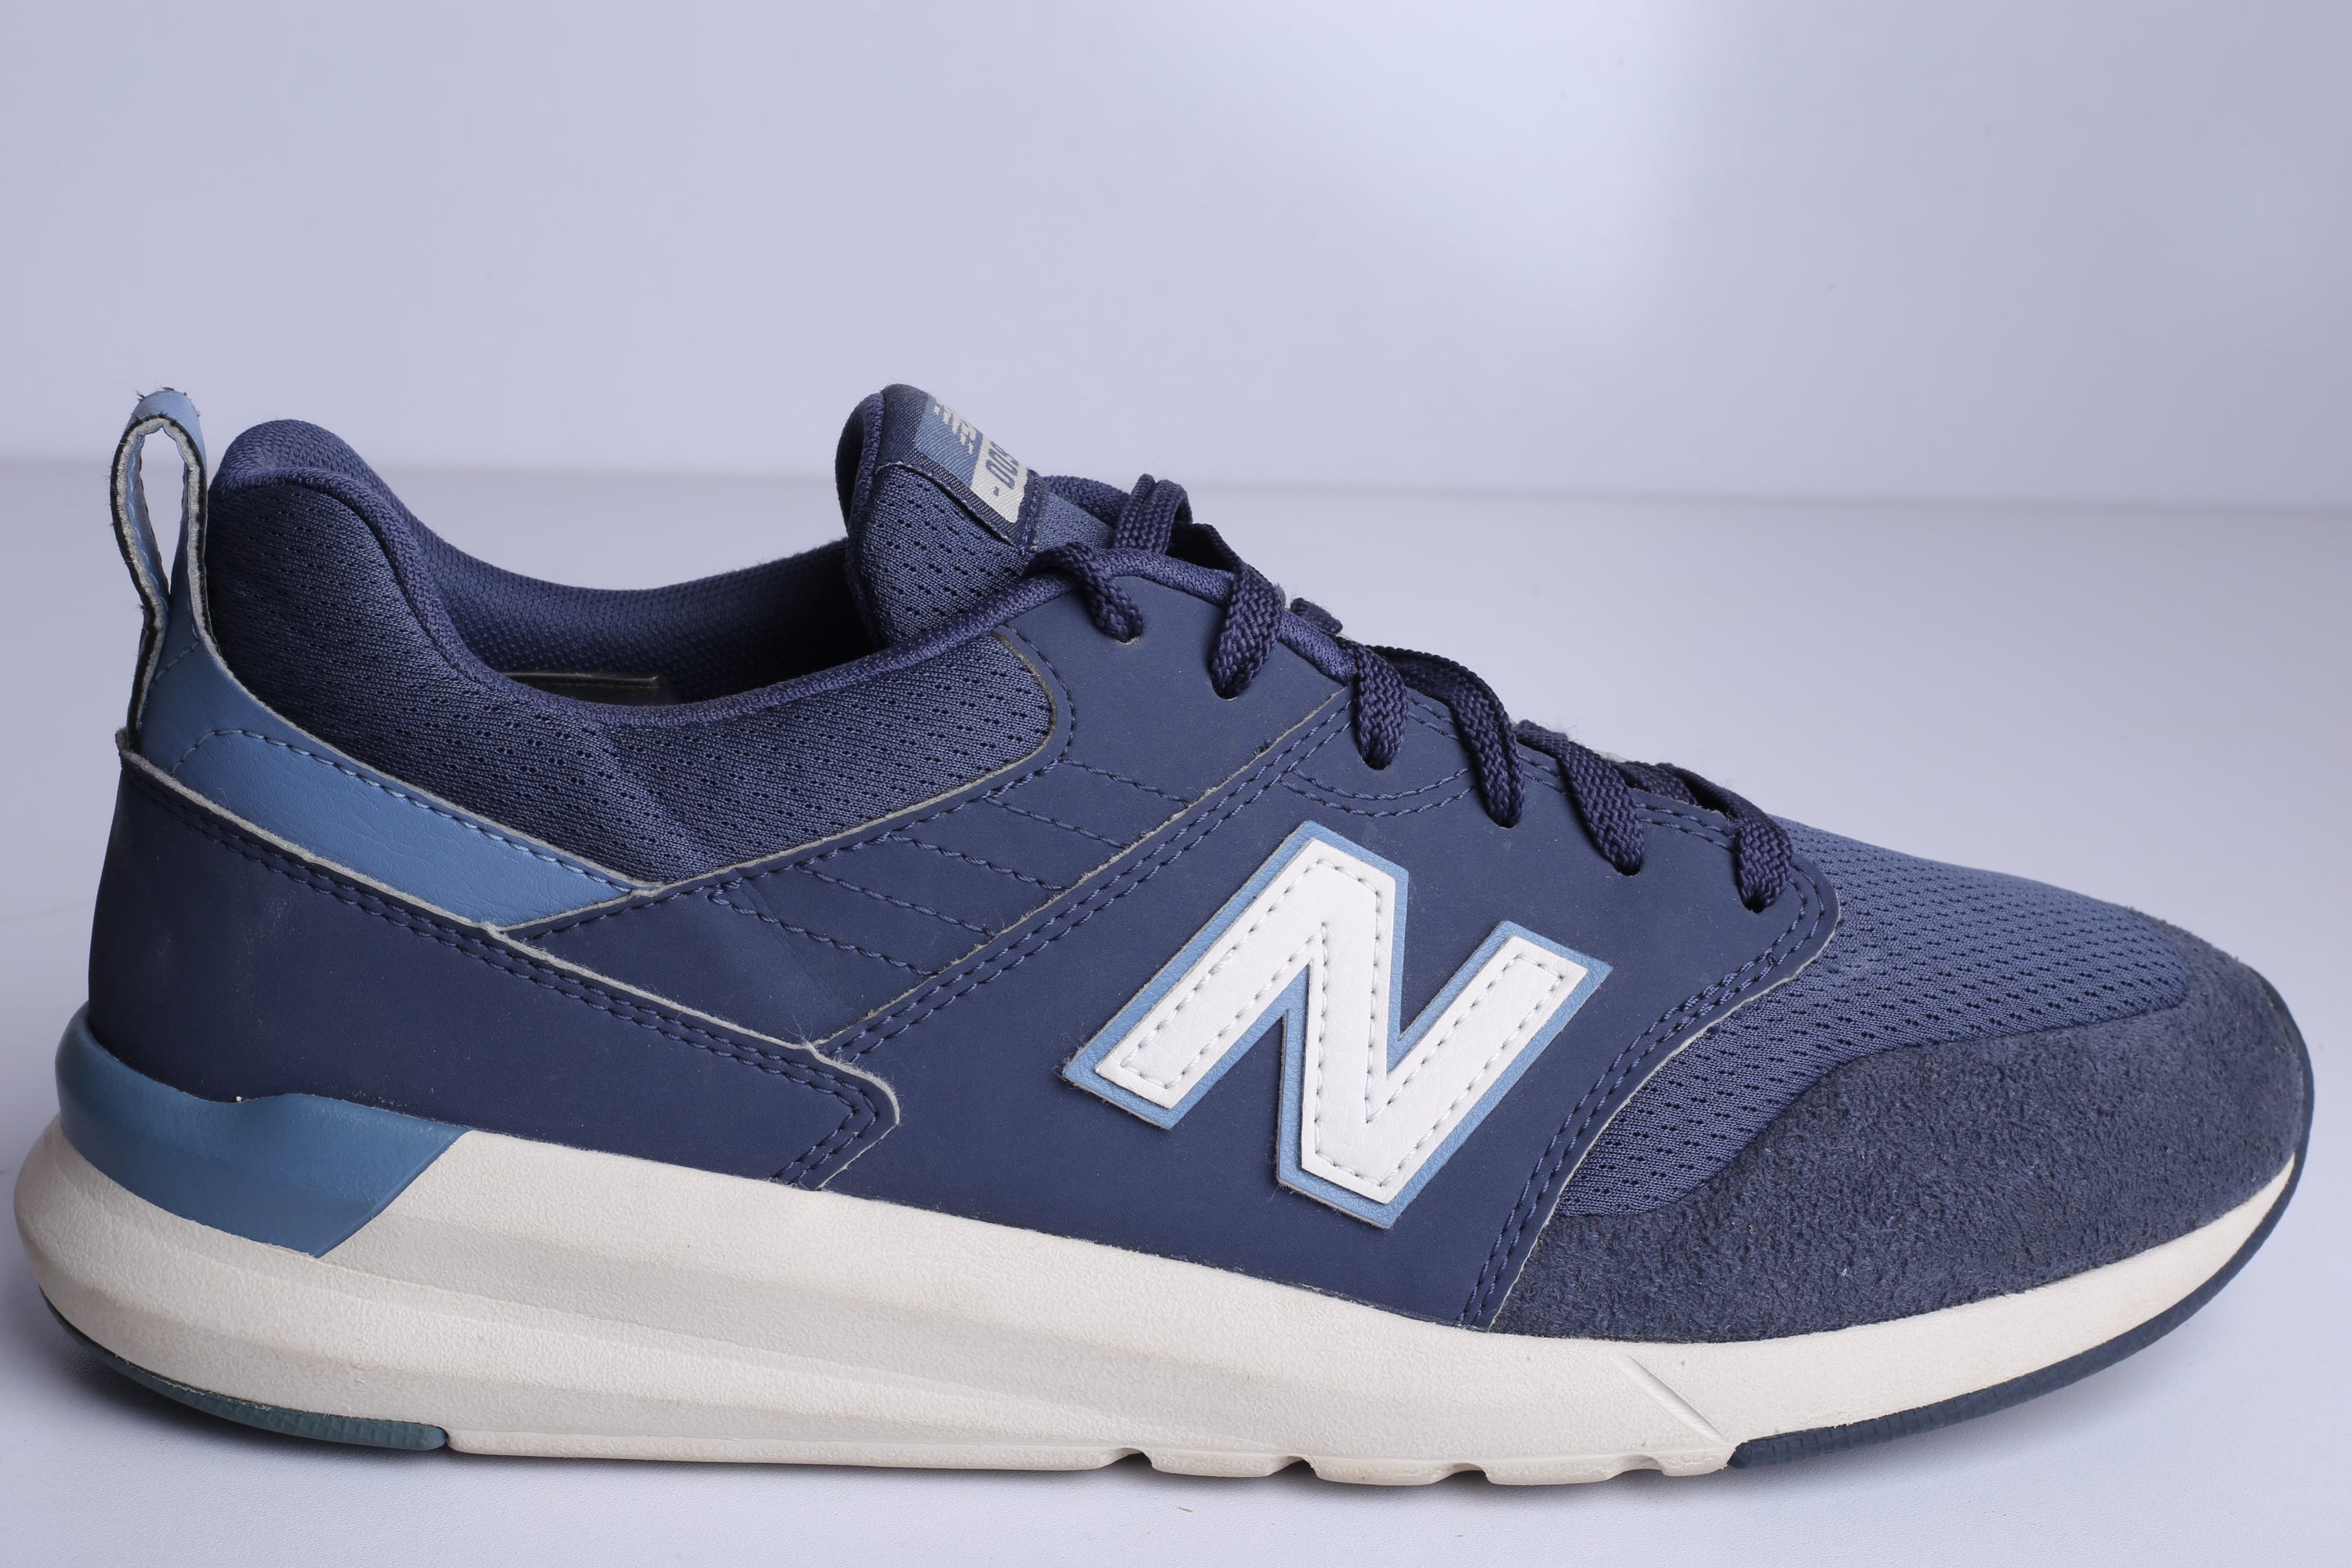 New Balance 009 Sneaker - (Condition Excellent)